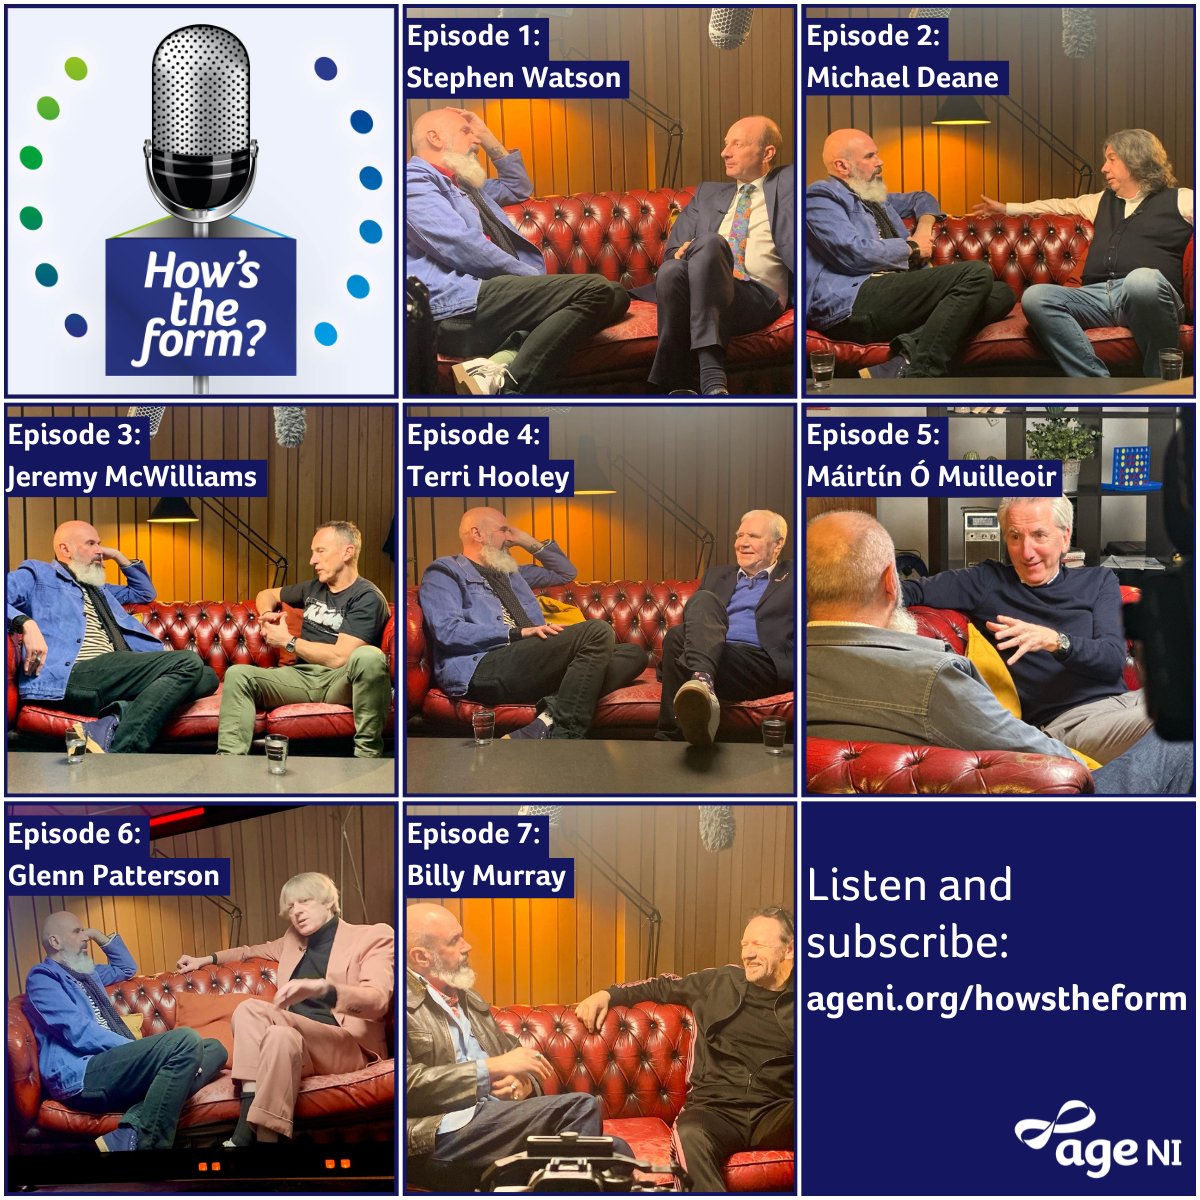 Get caught up on 'How's the form?'! Listen back now for interviews with NI's most high profile men chatting about life after 50: ageni.org/howstheform @MovemberUK @winkerwatson1 @MichaelDeane61 @McWill99 @newbelfast @HeaneyCentre @prokick @InspireWBGroup @RelateNI @BITC